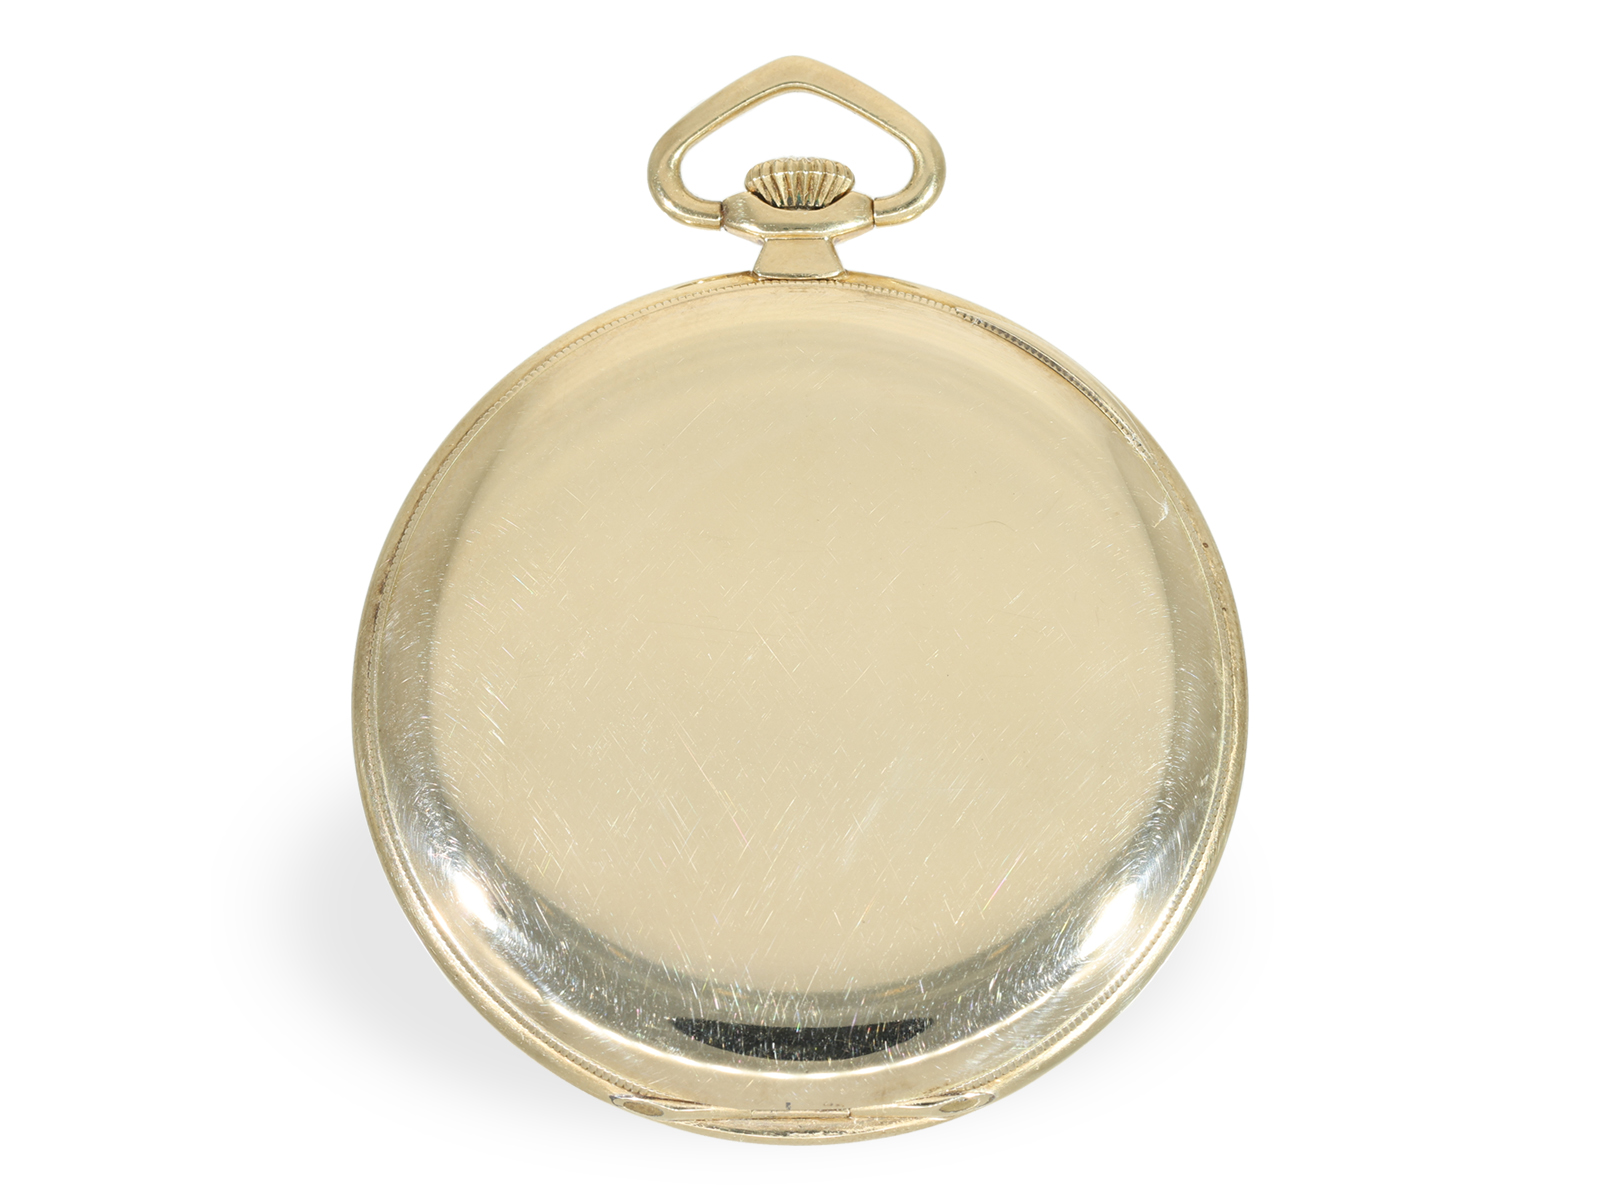 Pocket watch: Art Deco dress watch in almost like new condition with gold watch chain, around 1930 - Image 7 of 7